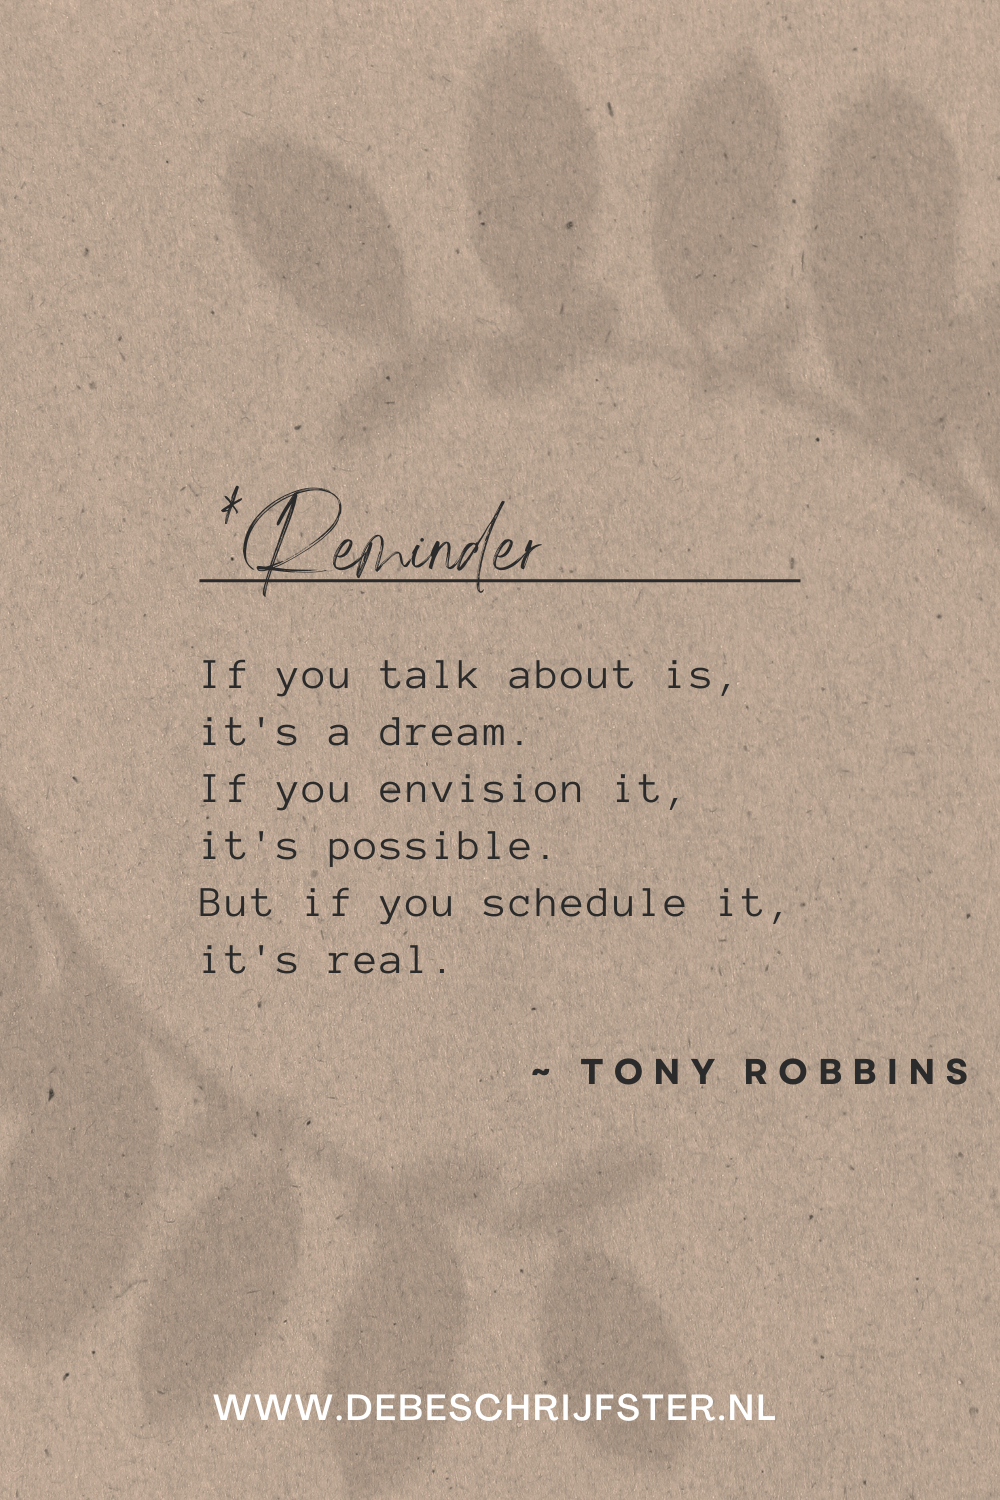 If you talk about it, it's a dream. If you envision it, it's possible. But if you schedule it, it is real. Tony Robbins.